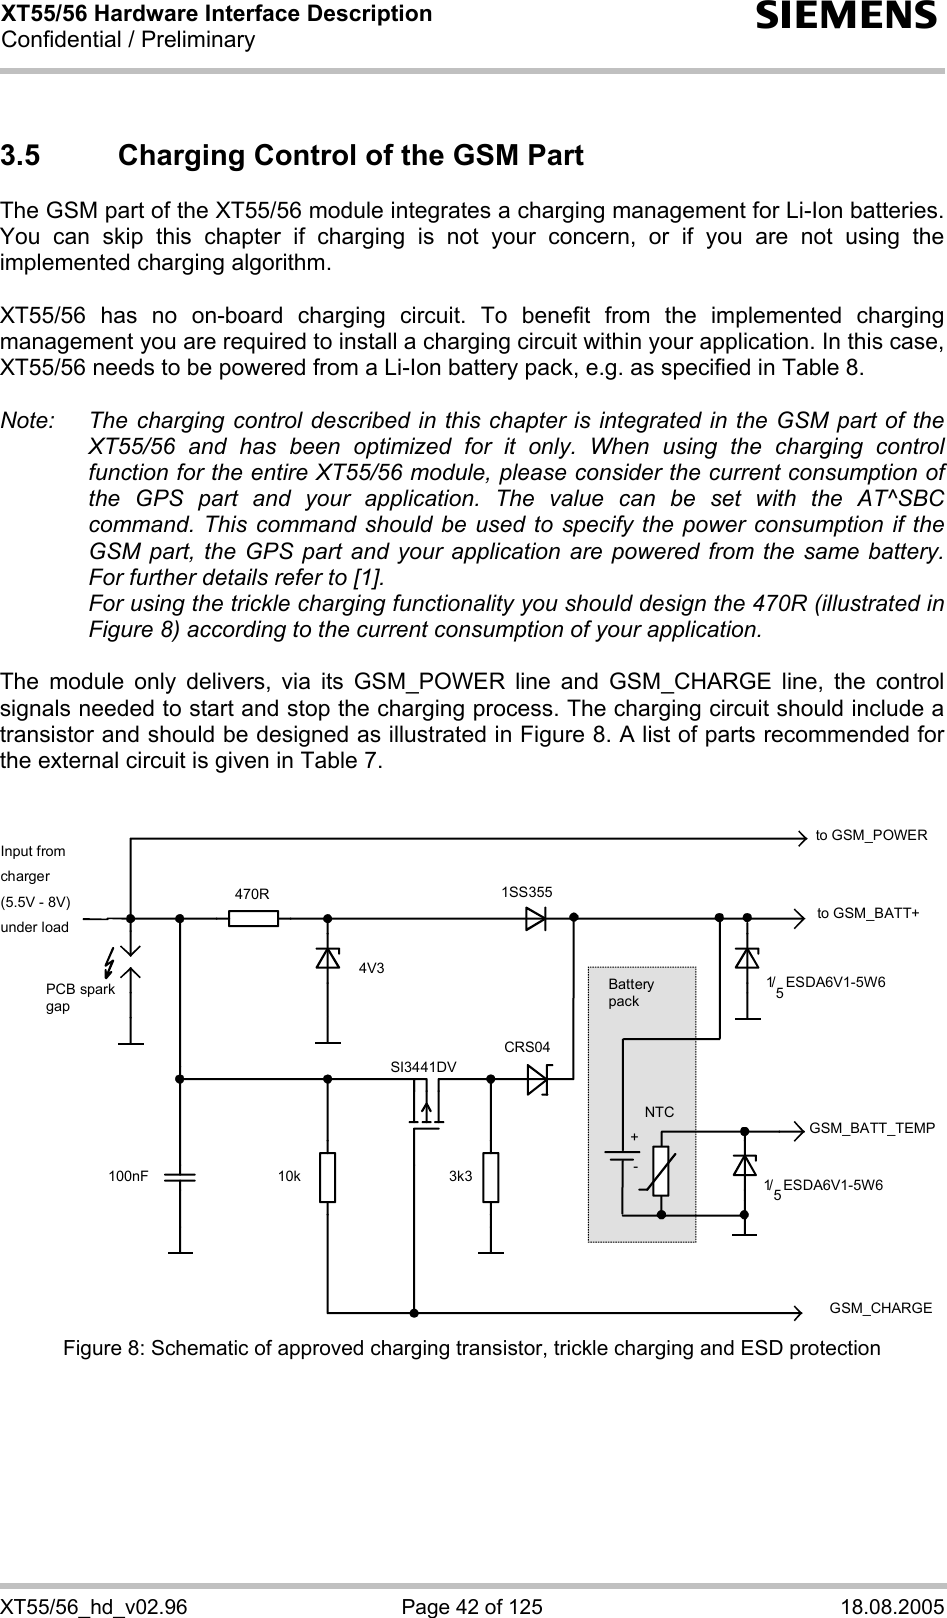 XT55/56 Hardware Interface Description Confidential / Preliminary s XT55/56_hd_v02.96  Page 42 of 125  18.08.2005 3.5  Charging Control of the GSM Part The GSM part of the XT55/56 module integrates a charging management for Li-Ion batteries. You can skip this chapter if charging is not your concern, or if you are not using the implemented charging algorithm.  XT55/56 has no on-board charging circuit. To benefit from the implemented charging management you are required to install a charging circuit within your application. In this case, XT55/56 needs to be powered from a Li-Ion battery pack, e.g. as specified in Table 8.  Note:  The charging control described in this chapter is integrated in the GSM part of the XT55/56 and has been optimized for it only. When using the charging control function for the entire XT55/56 module, please consider the current consumption of the GPS part and your application. The value can be set with the AT^SBC command. This command should be used to specify the power consumption if the GSM part, the GPS part and your application are powered from the same battery. For further details refer to [1].   For using the trickle charging functionality you should design the 470R (illustrated in Figure 8) according to the current consumption of your application.  The module only delivers, via its GSM_POWER line and GSM_CHARGE line, the control signals needed to start and stop the charging process. The charging circuit should include a transistor and should be designed as illustrated in Figure 8. A list of parts recommended for the external circuit is given in Table 7.   to GSM_BATT+Input fromcharger(5.5V - 8V)under loadGSM_CHARGE470R 1SS3553k3100nF 10kSI3441DV4V31/ 5 ESDA6V1-5W6to GSM_POWERGSM_BATT_TEMP1/ 5 ESDA6V1-5W6NTC+Battery packPCB spark gapCRS04- Figure 8: Schematic of approved charging transistor, trickle charging and ESD protection  